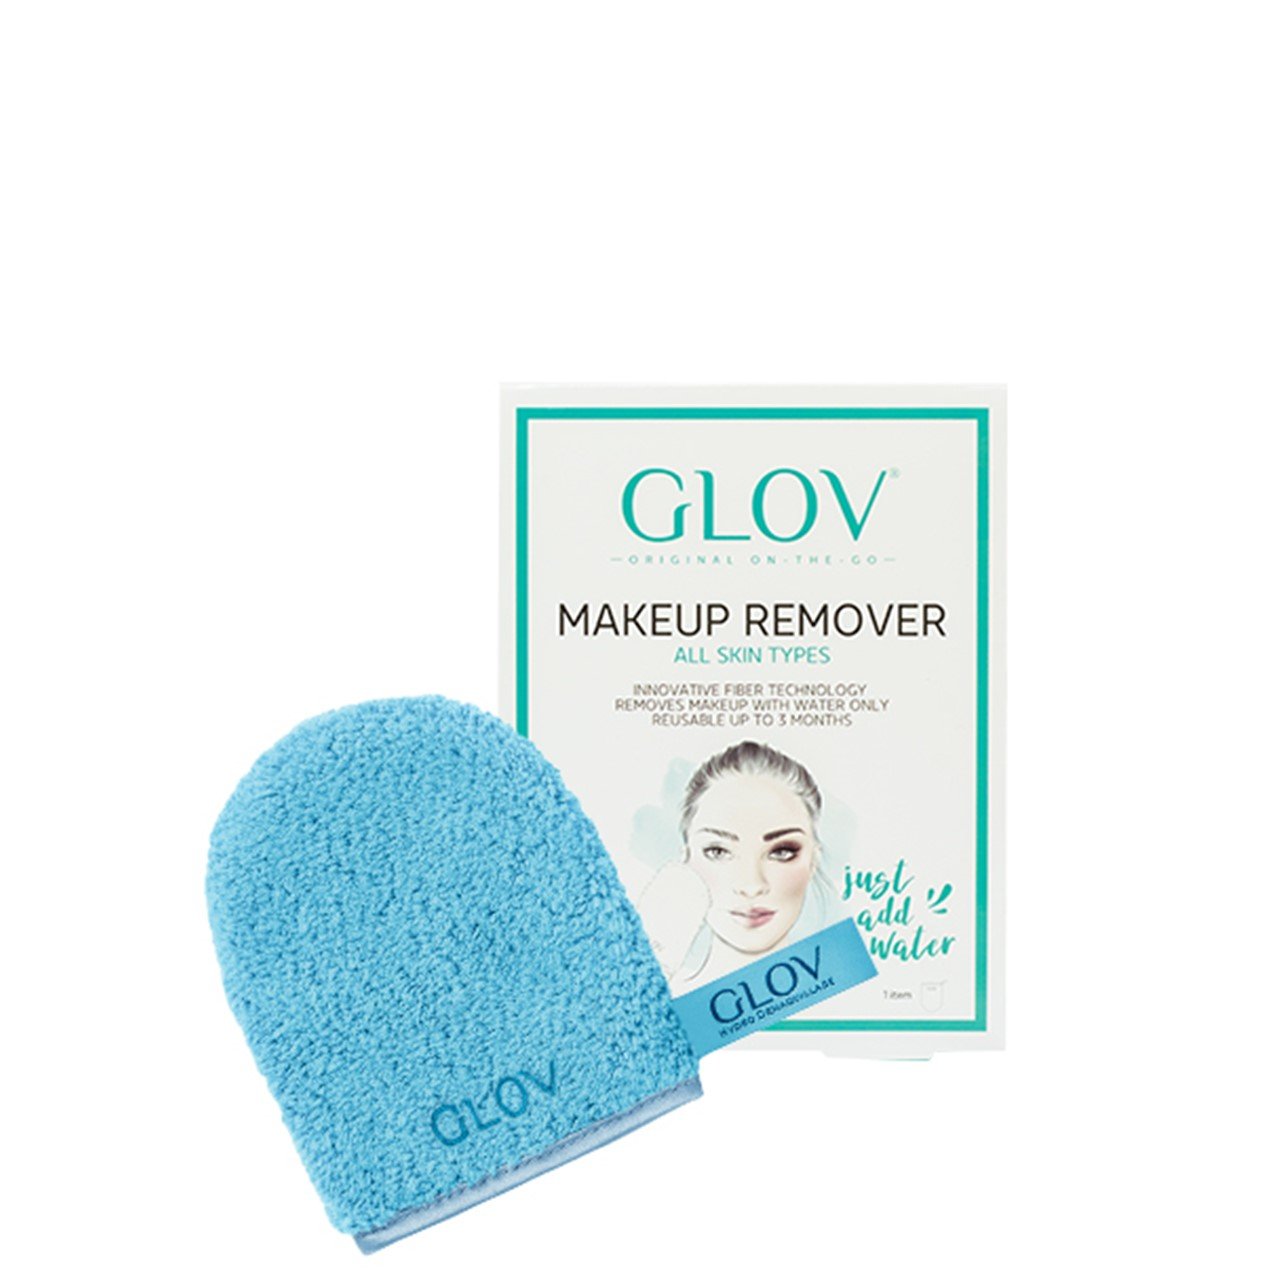 GLOV On-The-Go Makeup Remover Glove Bouncy Blue